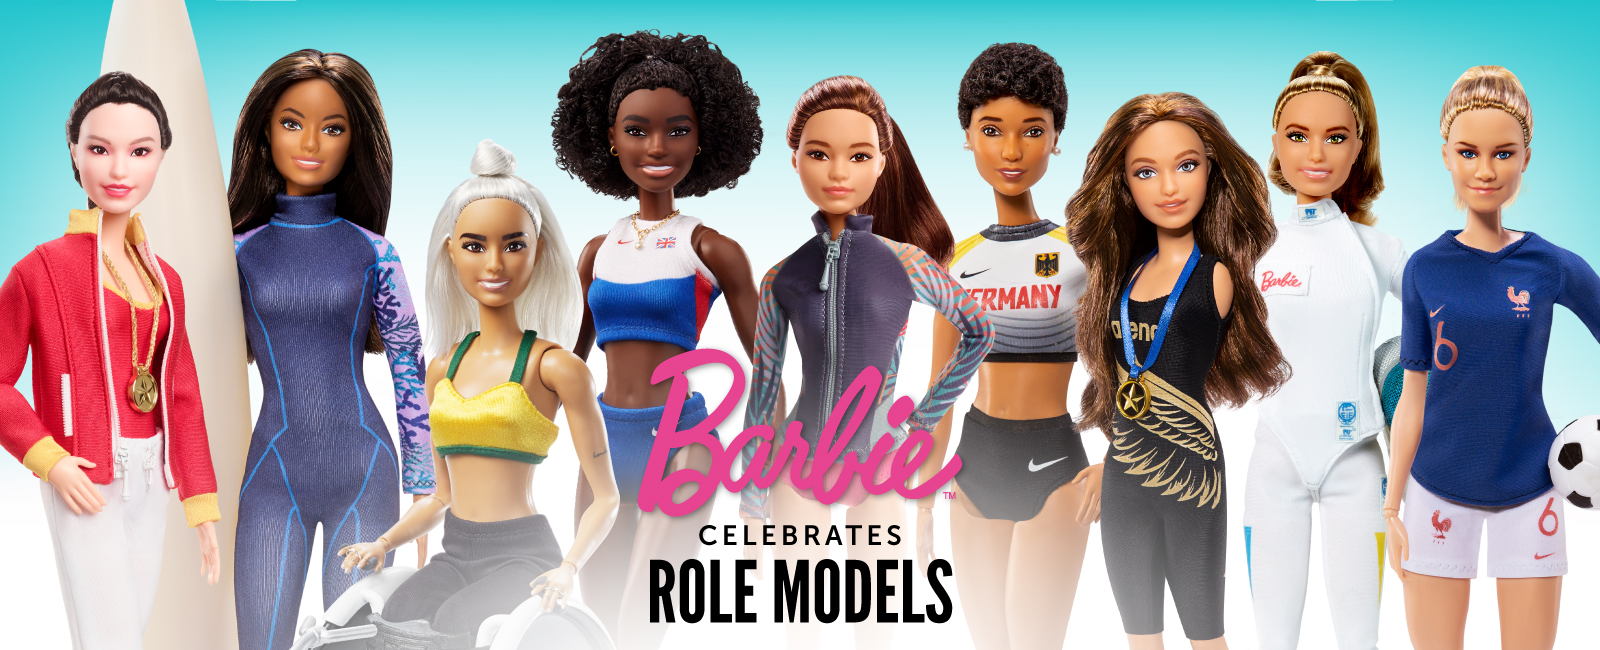 Mulboyne on X: Mattel has produced a Barbie doll based on surfer Shino  Matsuda. She is the third Japanese to be selected by the toymaker, after  Tetsuko Kuroyanagi, and Naomi Osaka.